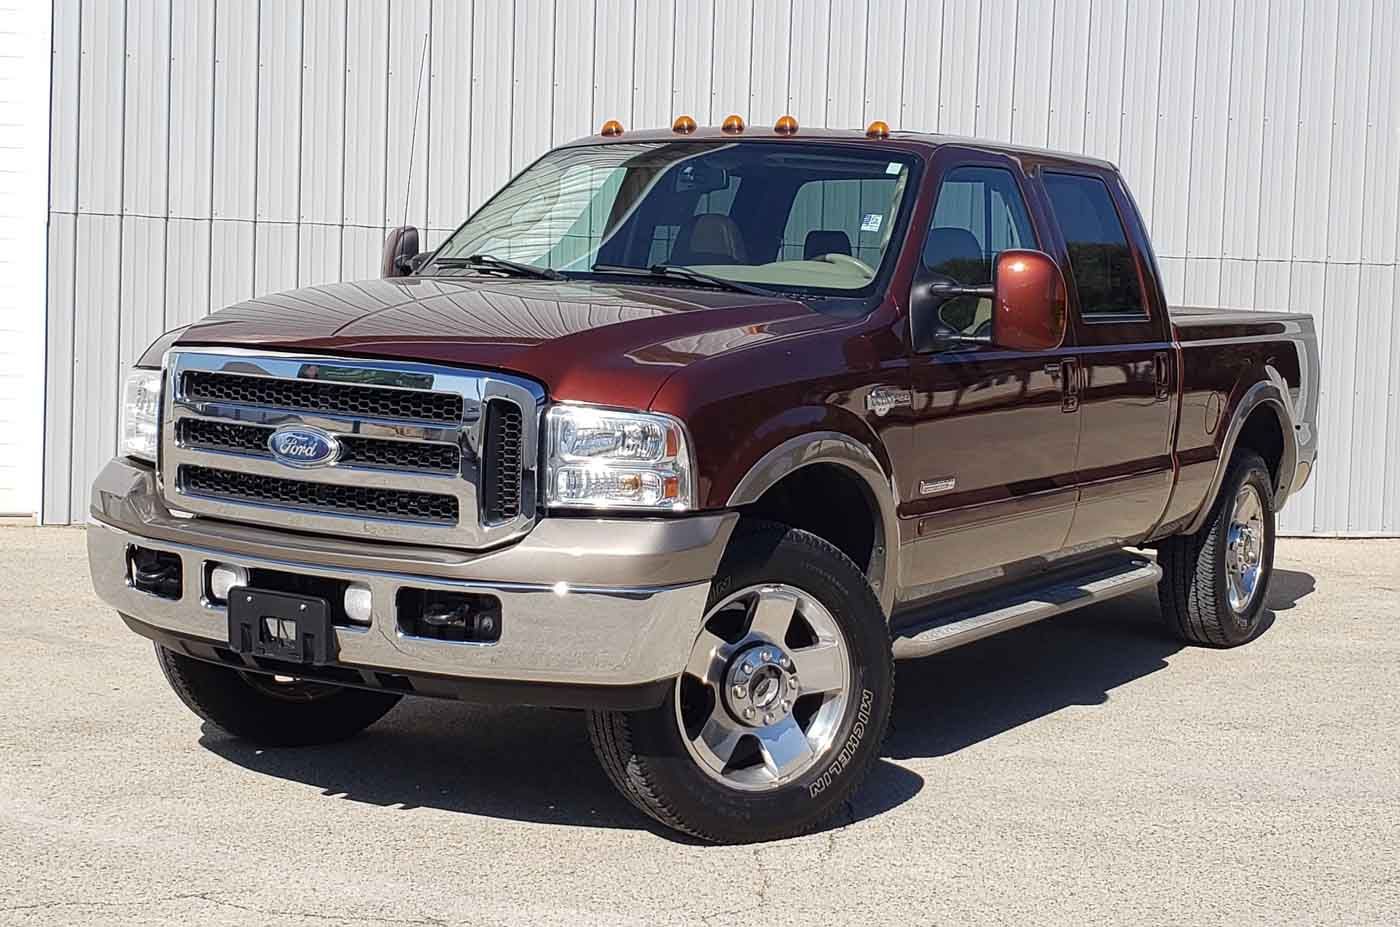  Ford F-250 King Ranch Powerstroke